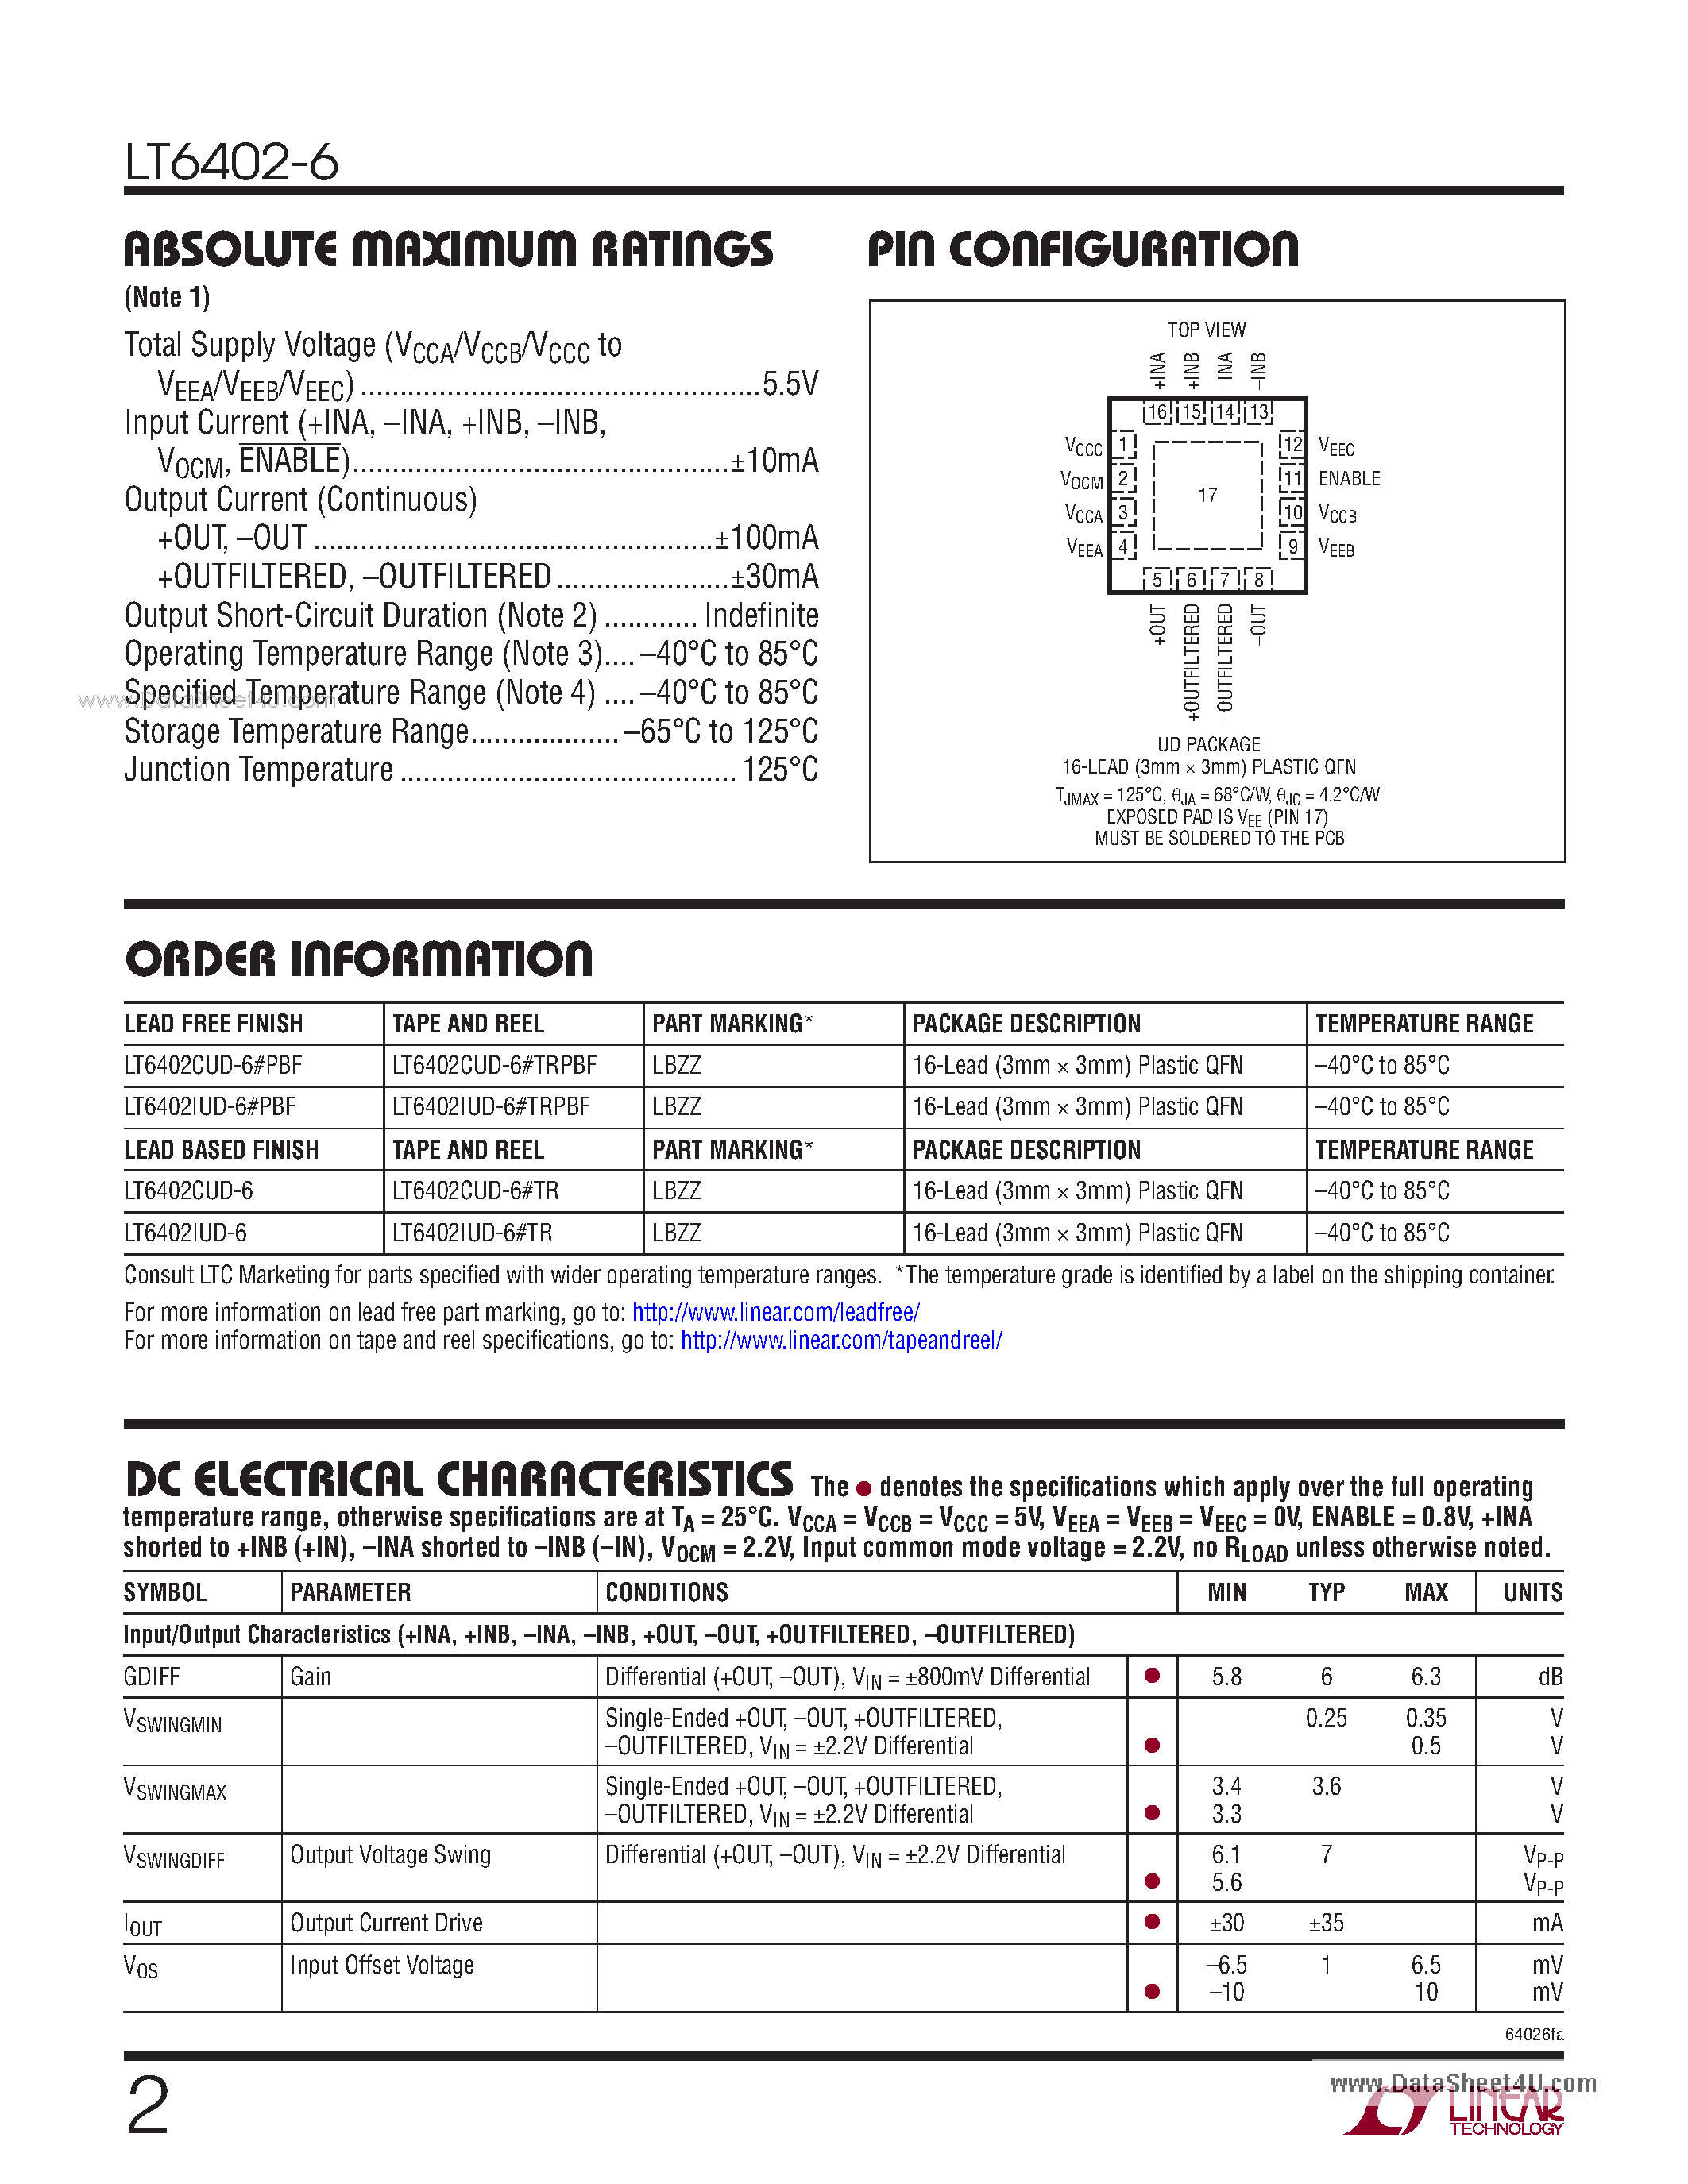 Datasheet LT6402-6 - Low Noise Differential Amplifier/ ADC Driver (AV = 6dB) page 2